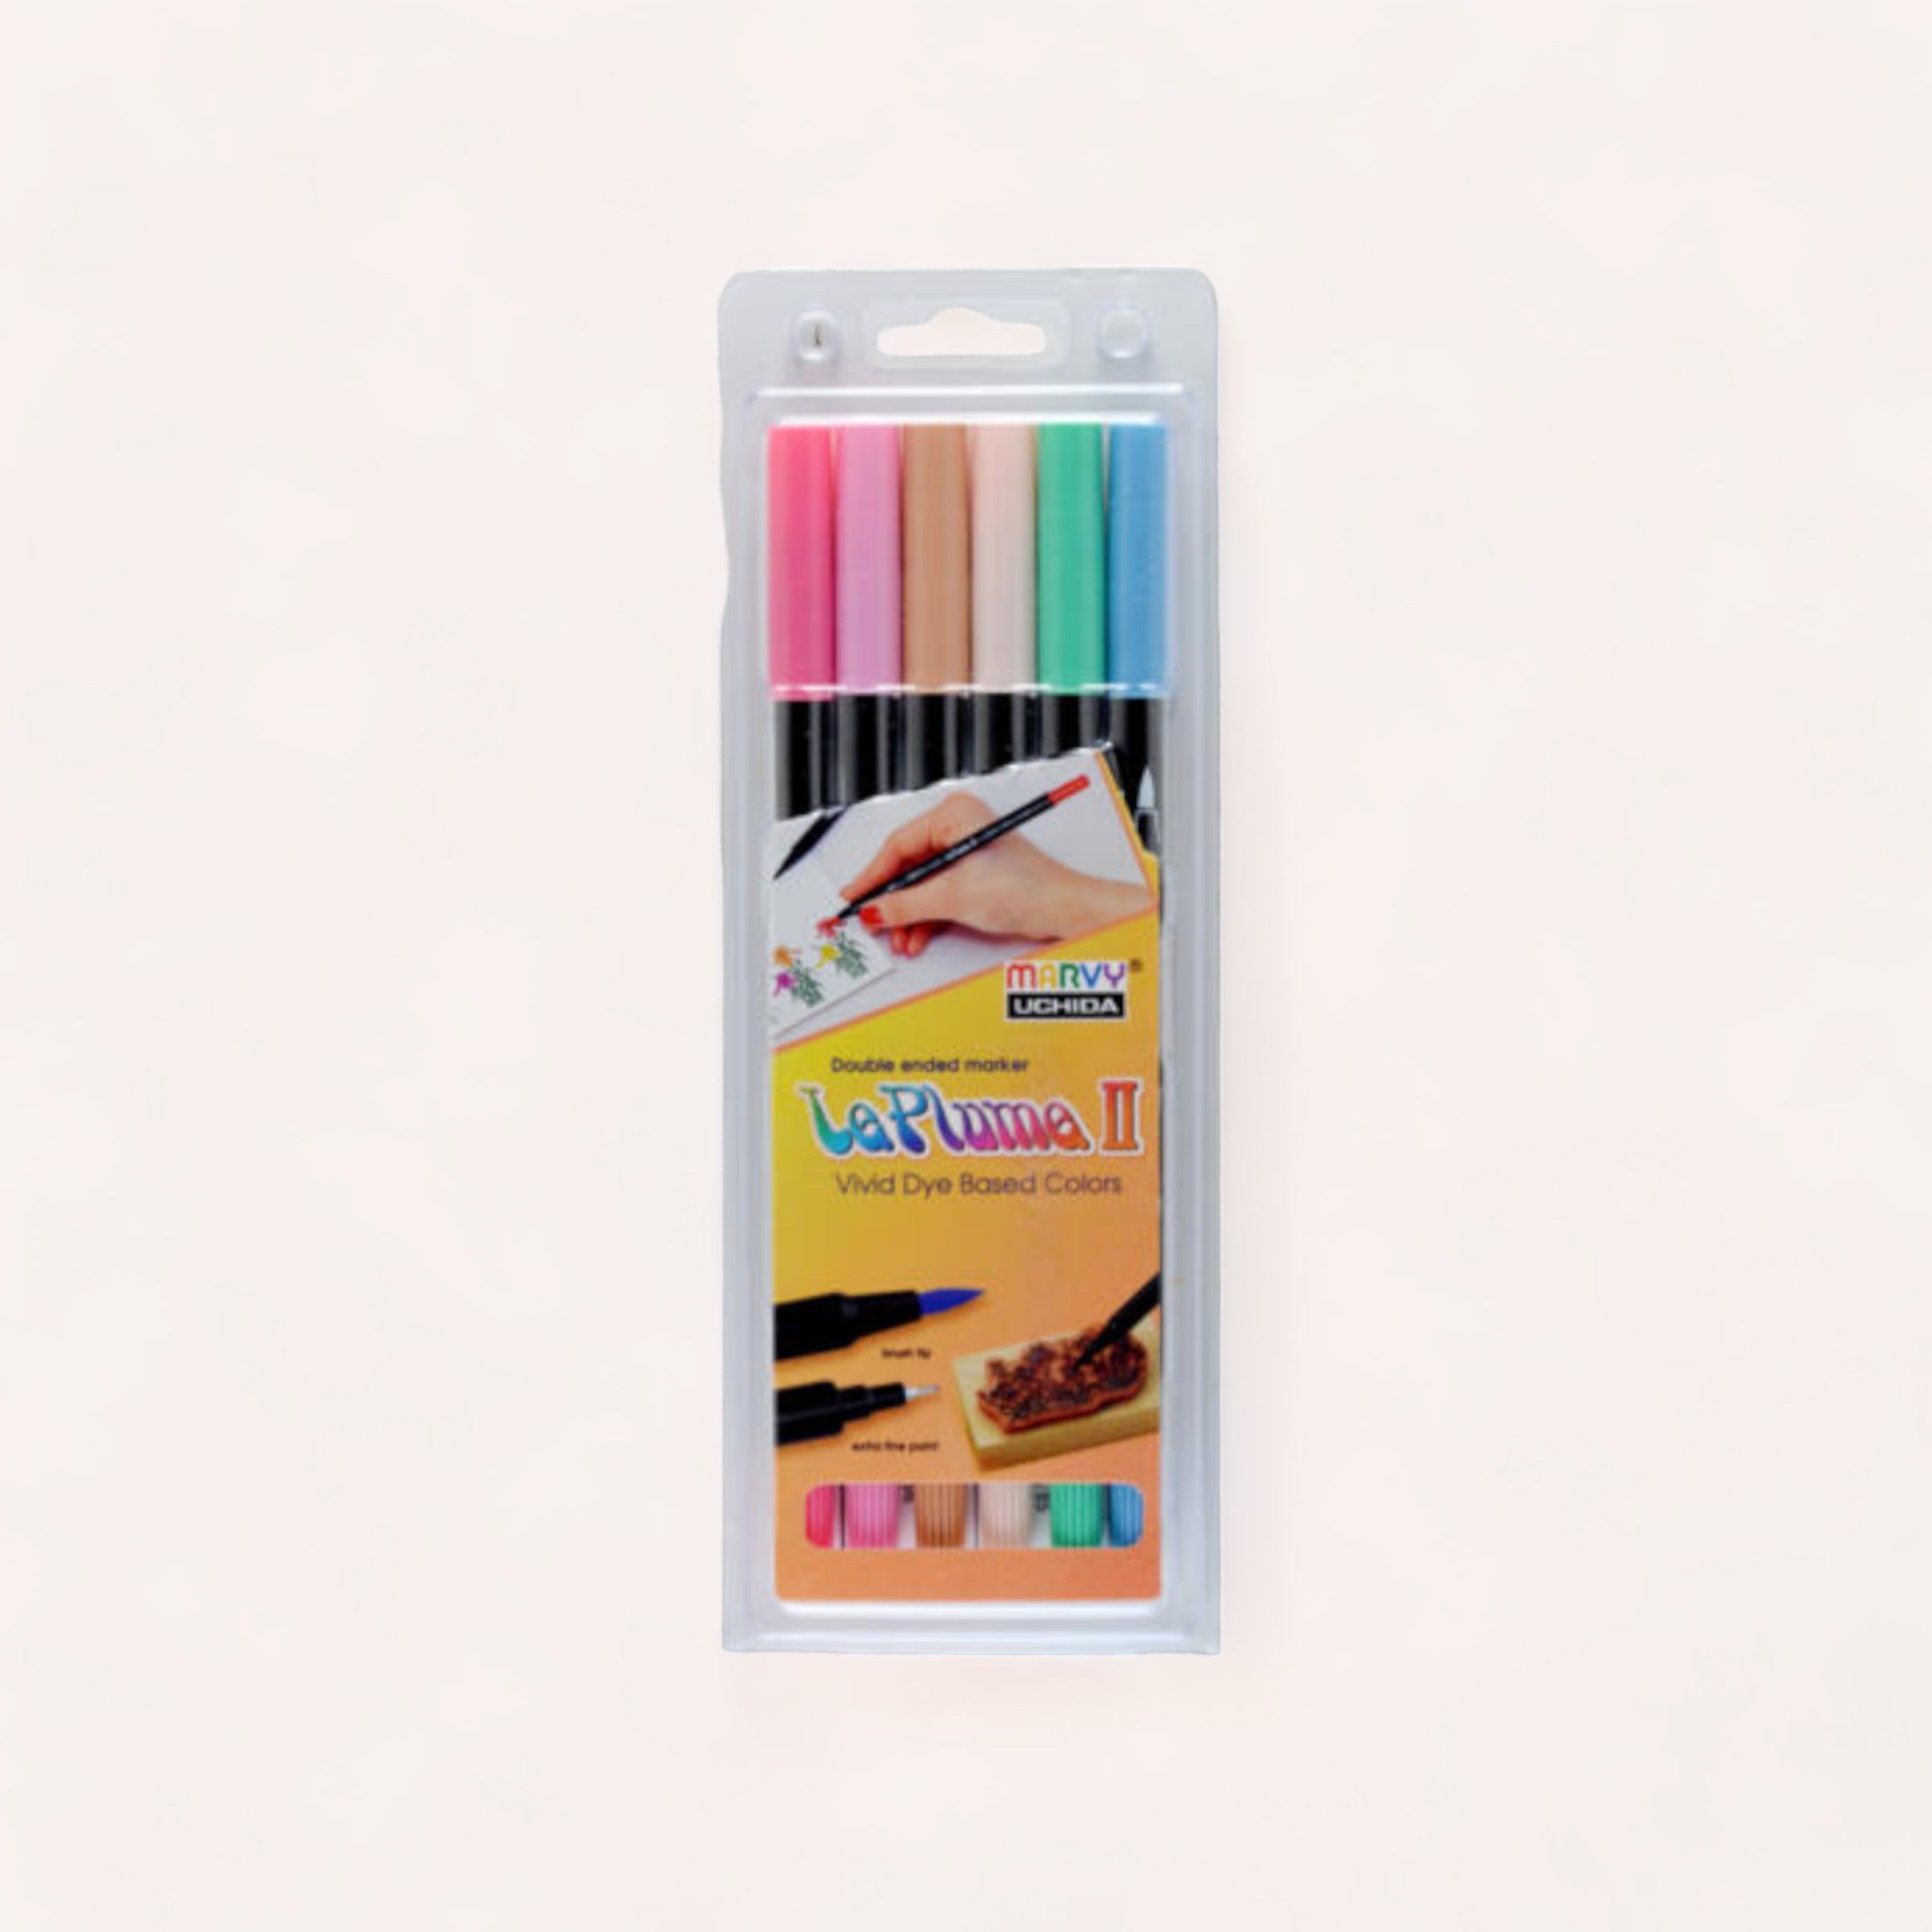 A pack of colorful, Marvy Le Plume II Dual Tip Marker Set - Pastel displayed on a light background, ideal for creative fabric dye projects.